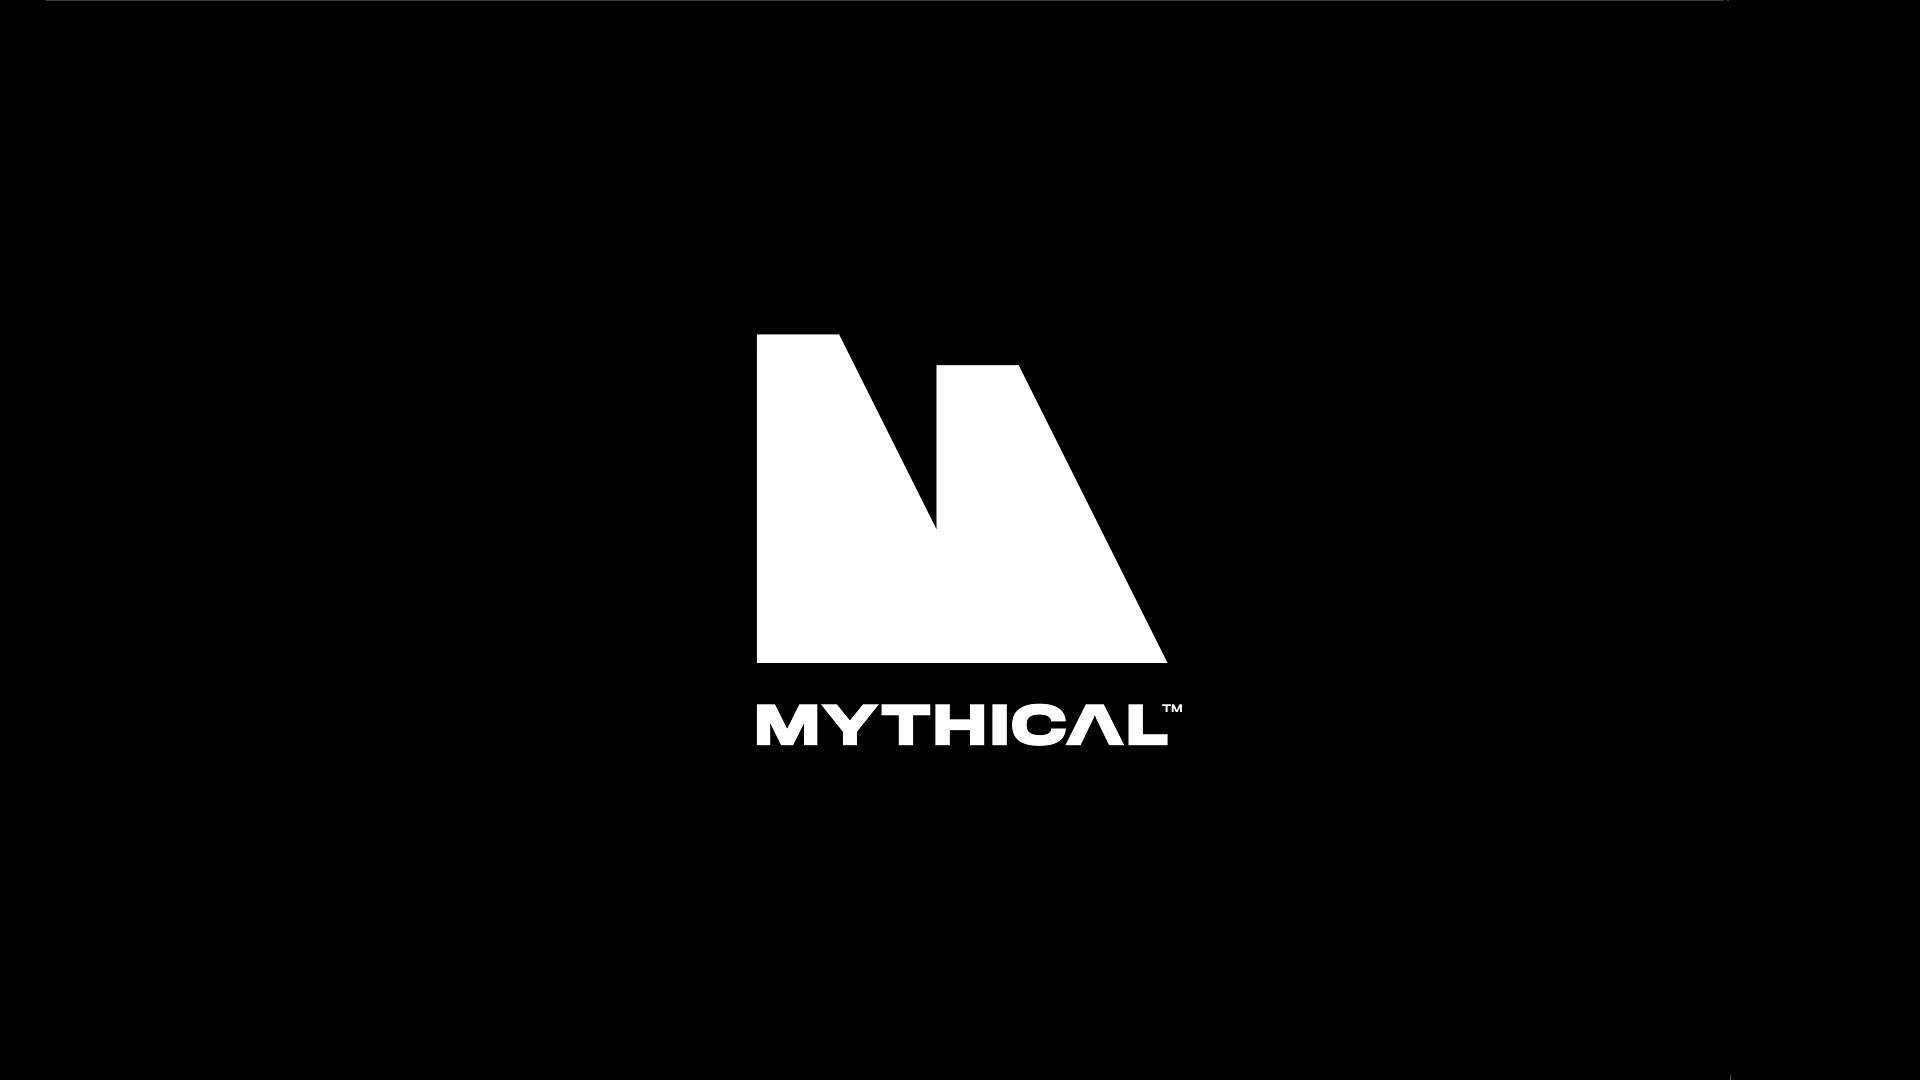 Mythical Games studio, Gaming industry partners, Blockchain marketplace, Game Freaks 365, 1920x1080 Full HD Desktop